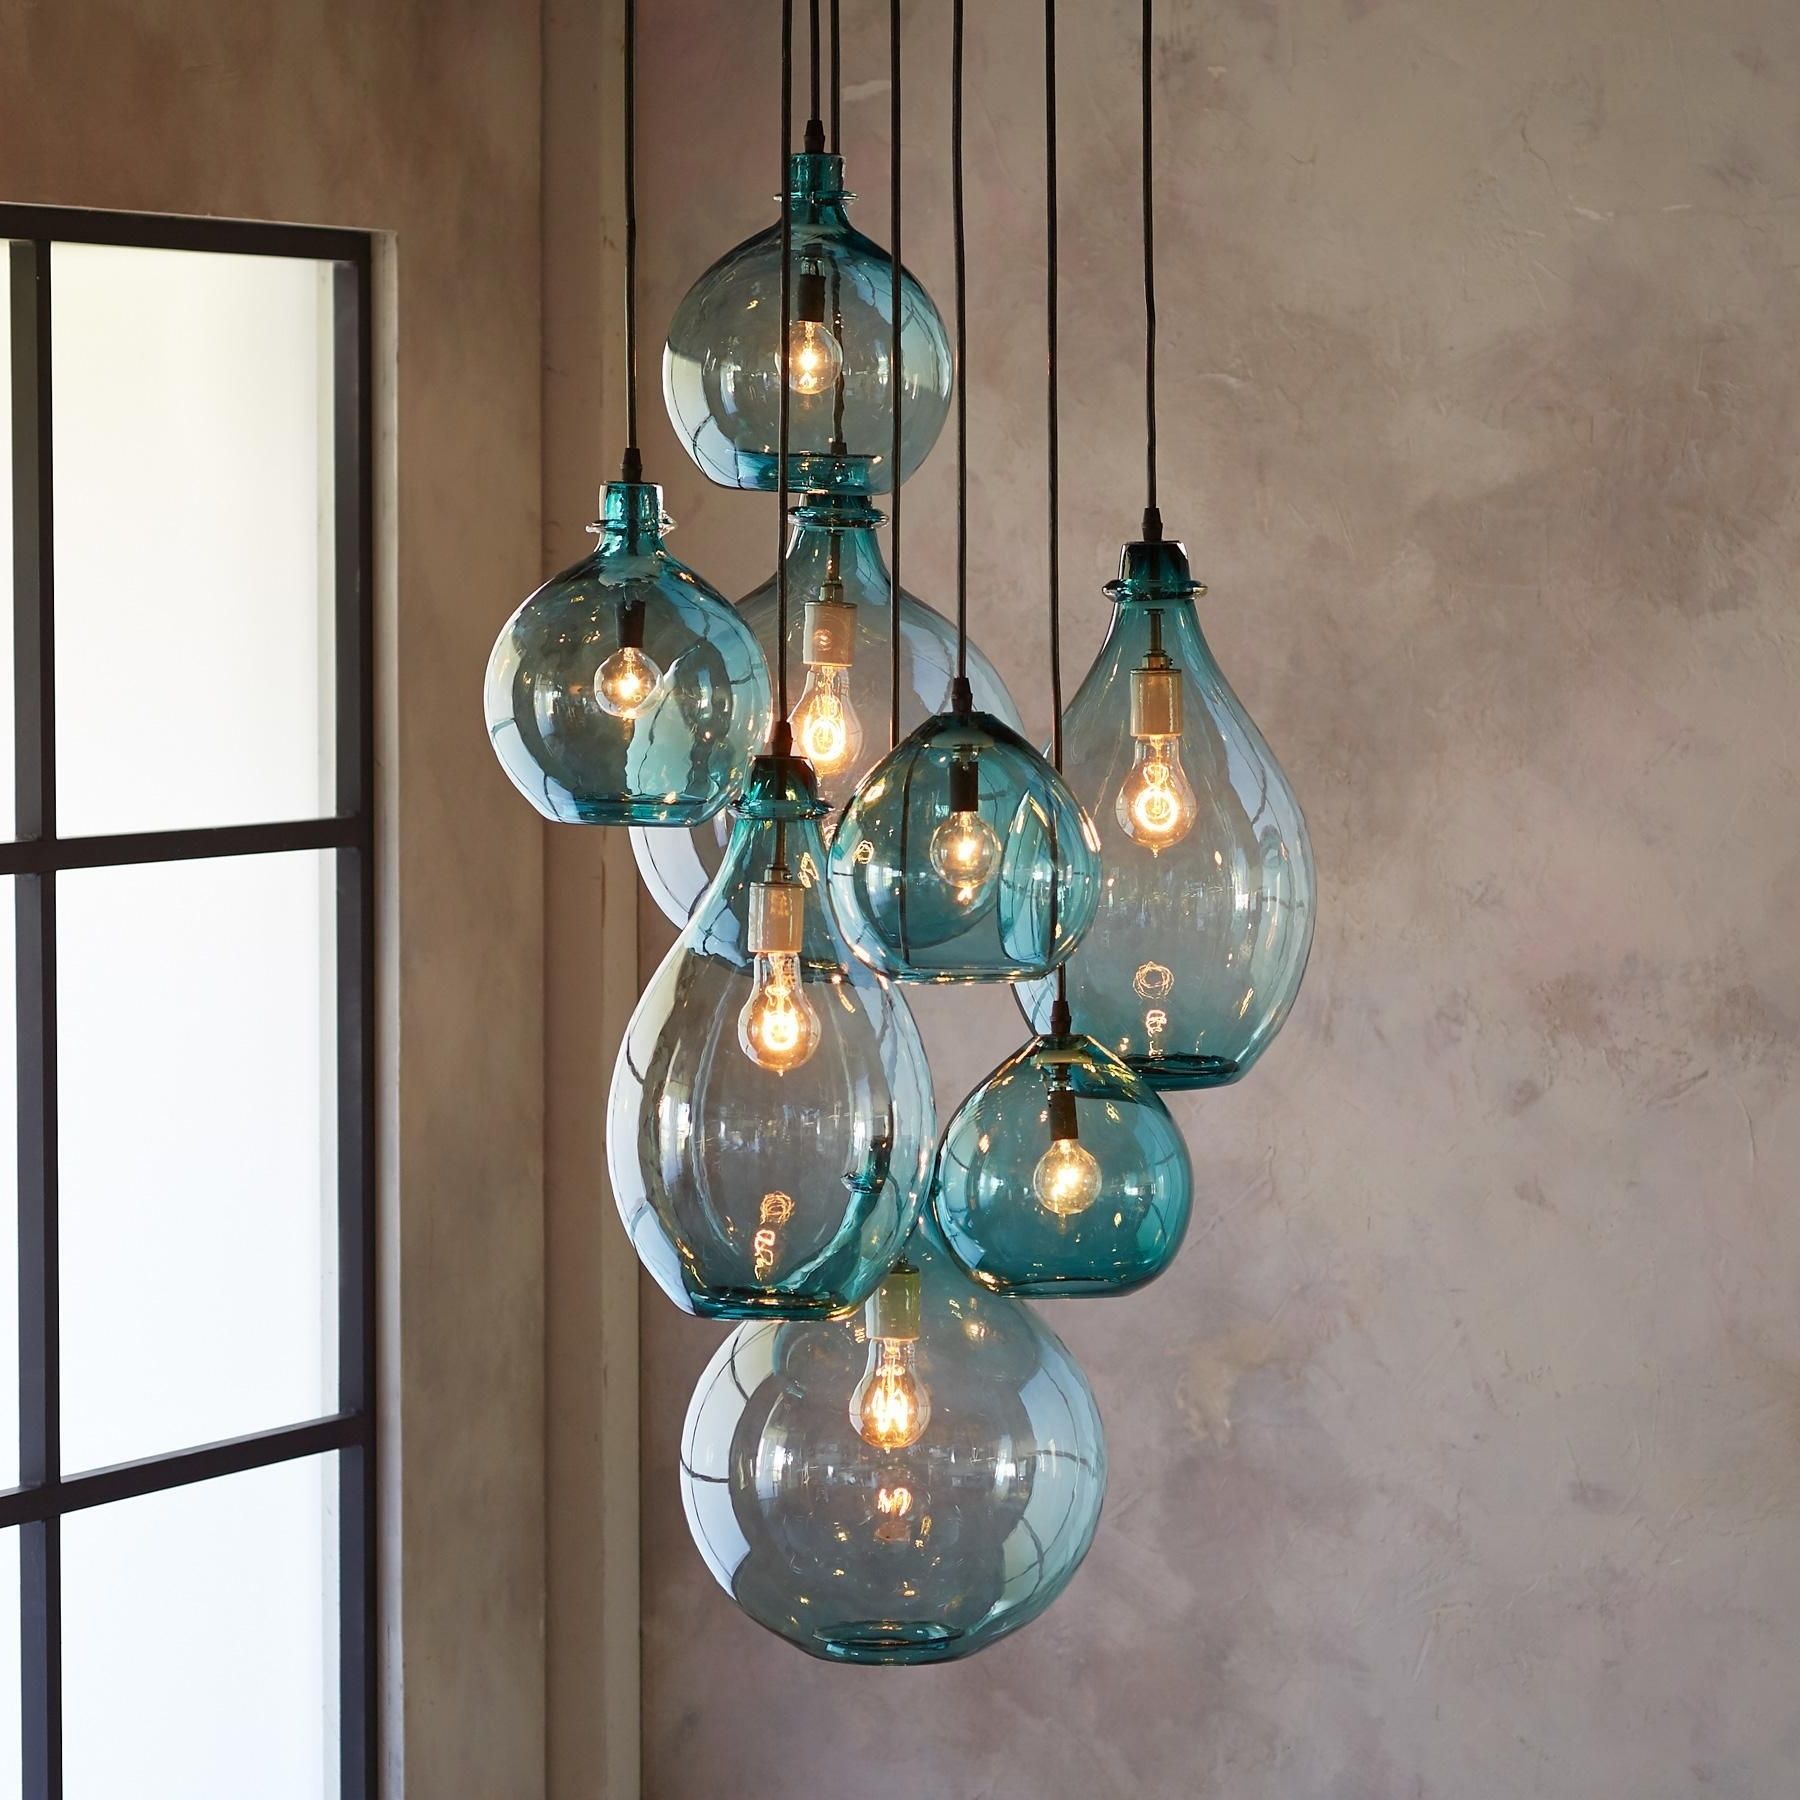 Newest Salon Glass Pendant Canopy — Limpid Turquoise Drops Of Hand Blown Intended For Turquoise Ball Chandeliers (View 4 of 20)